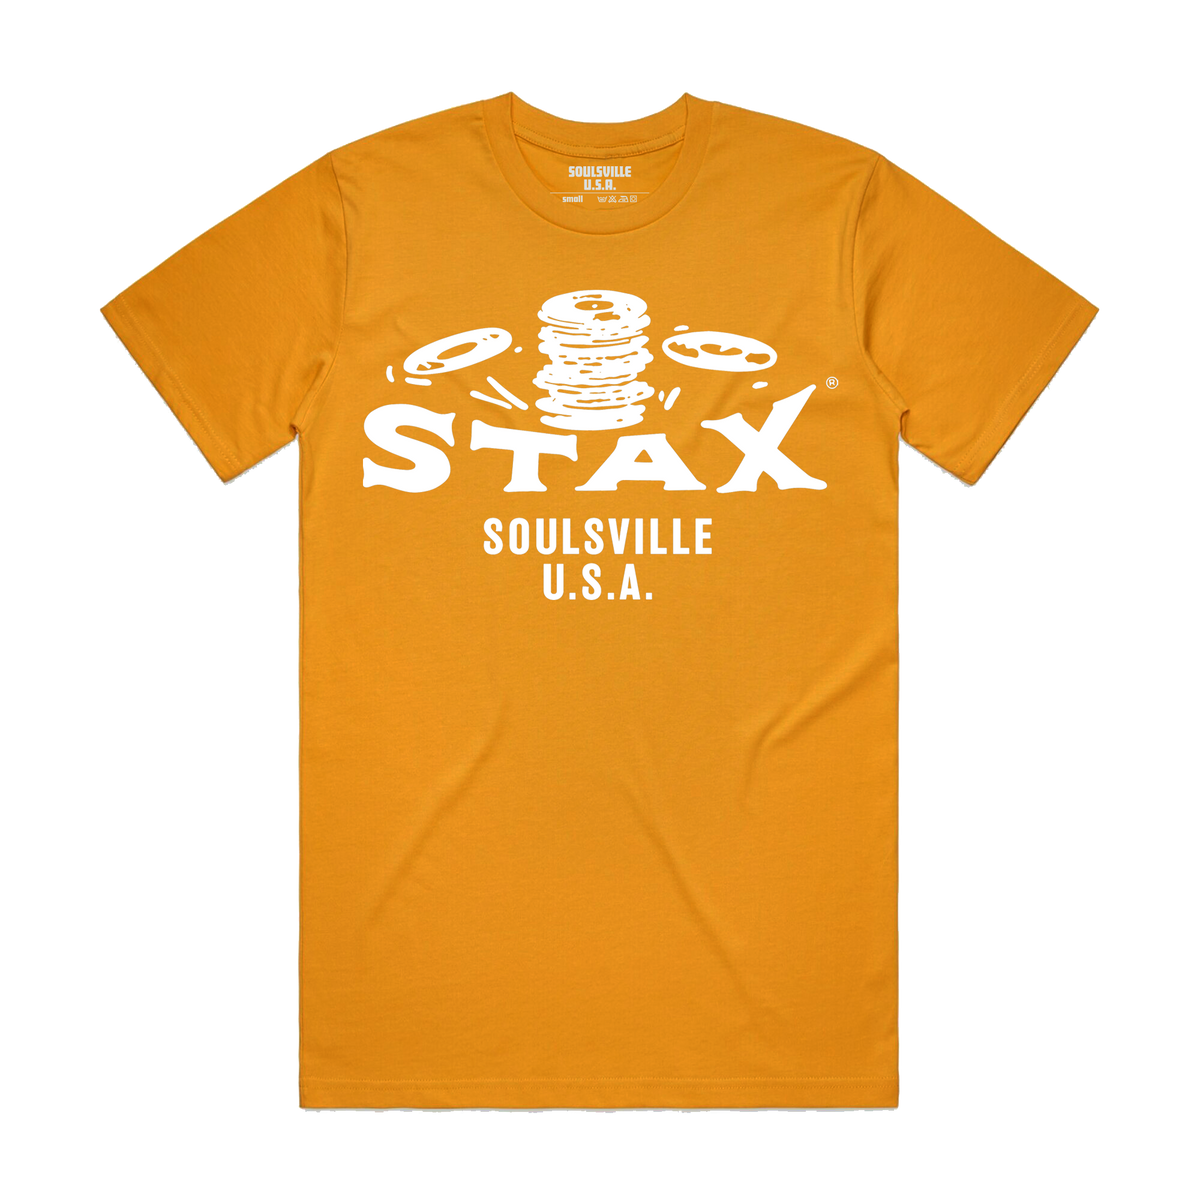 Stax Records - Soulsville U.S.A. T-Shirt (Mustard) - Stax Records